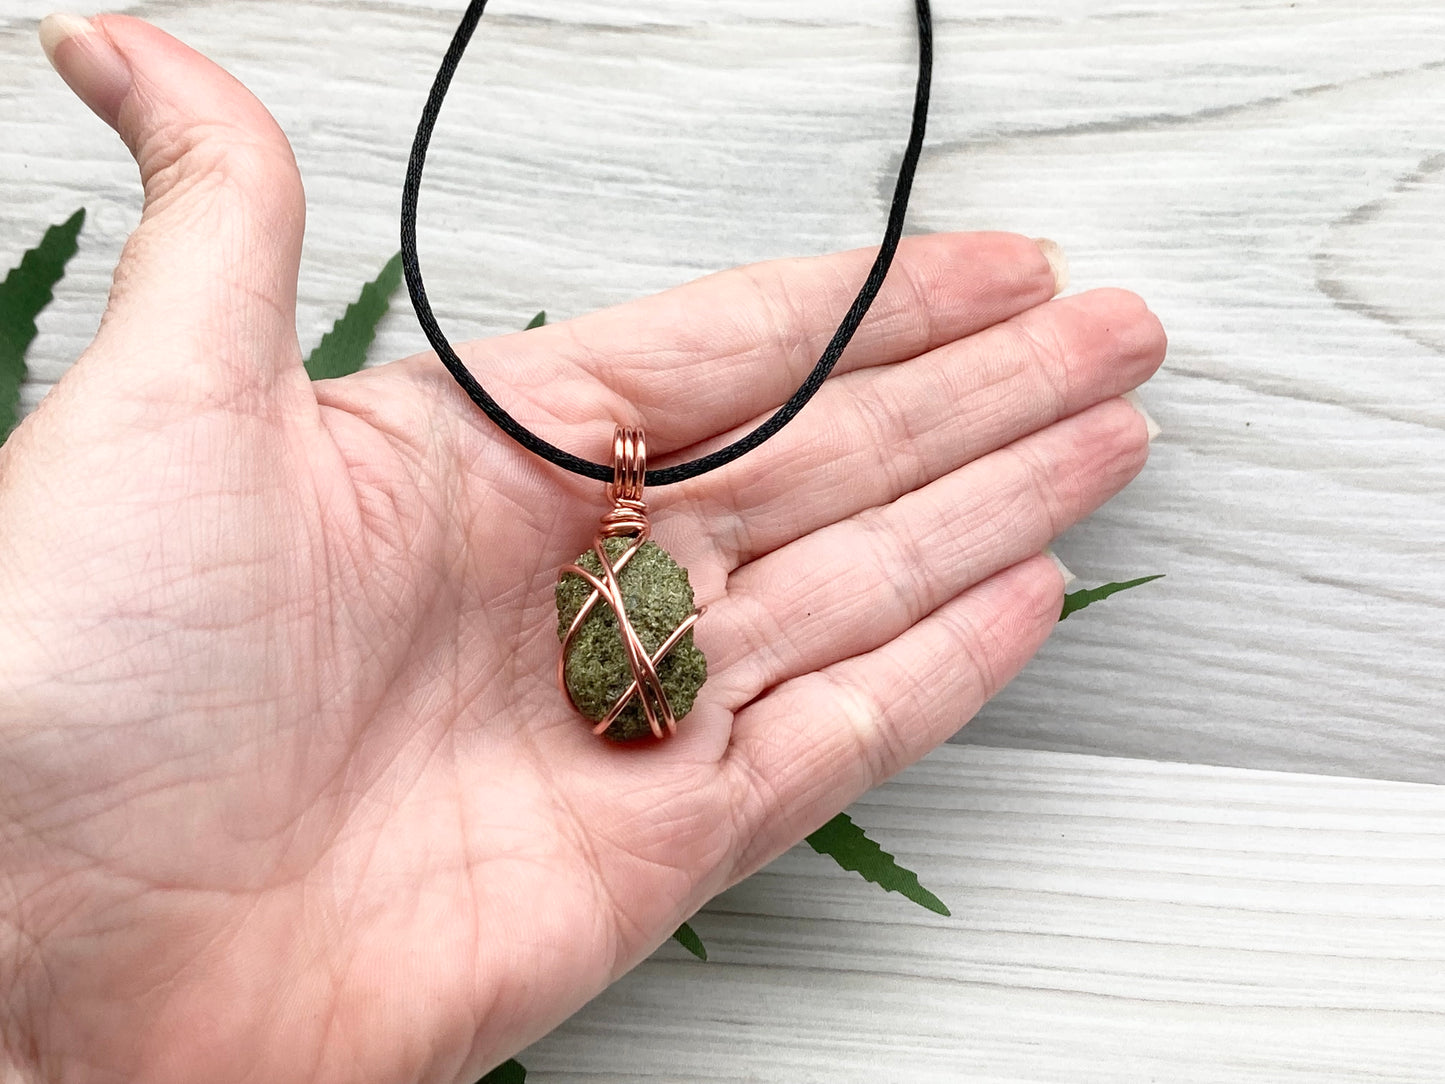 Raw Epidote Necklace. Copper Wire Wrapped Green Crystal Pendant. Comes On A Black Necklace. Handmade Spiritual Jewelry.